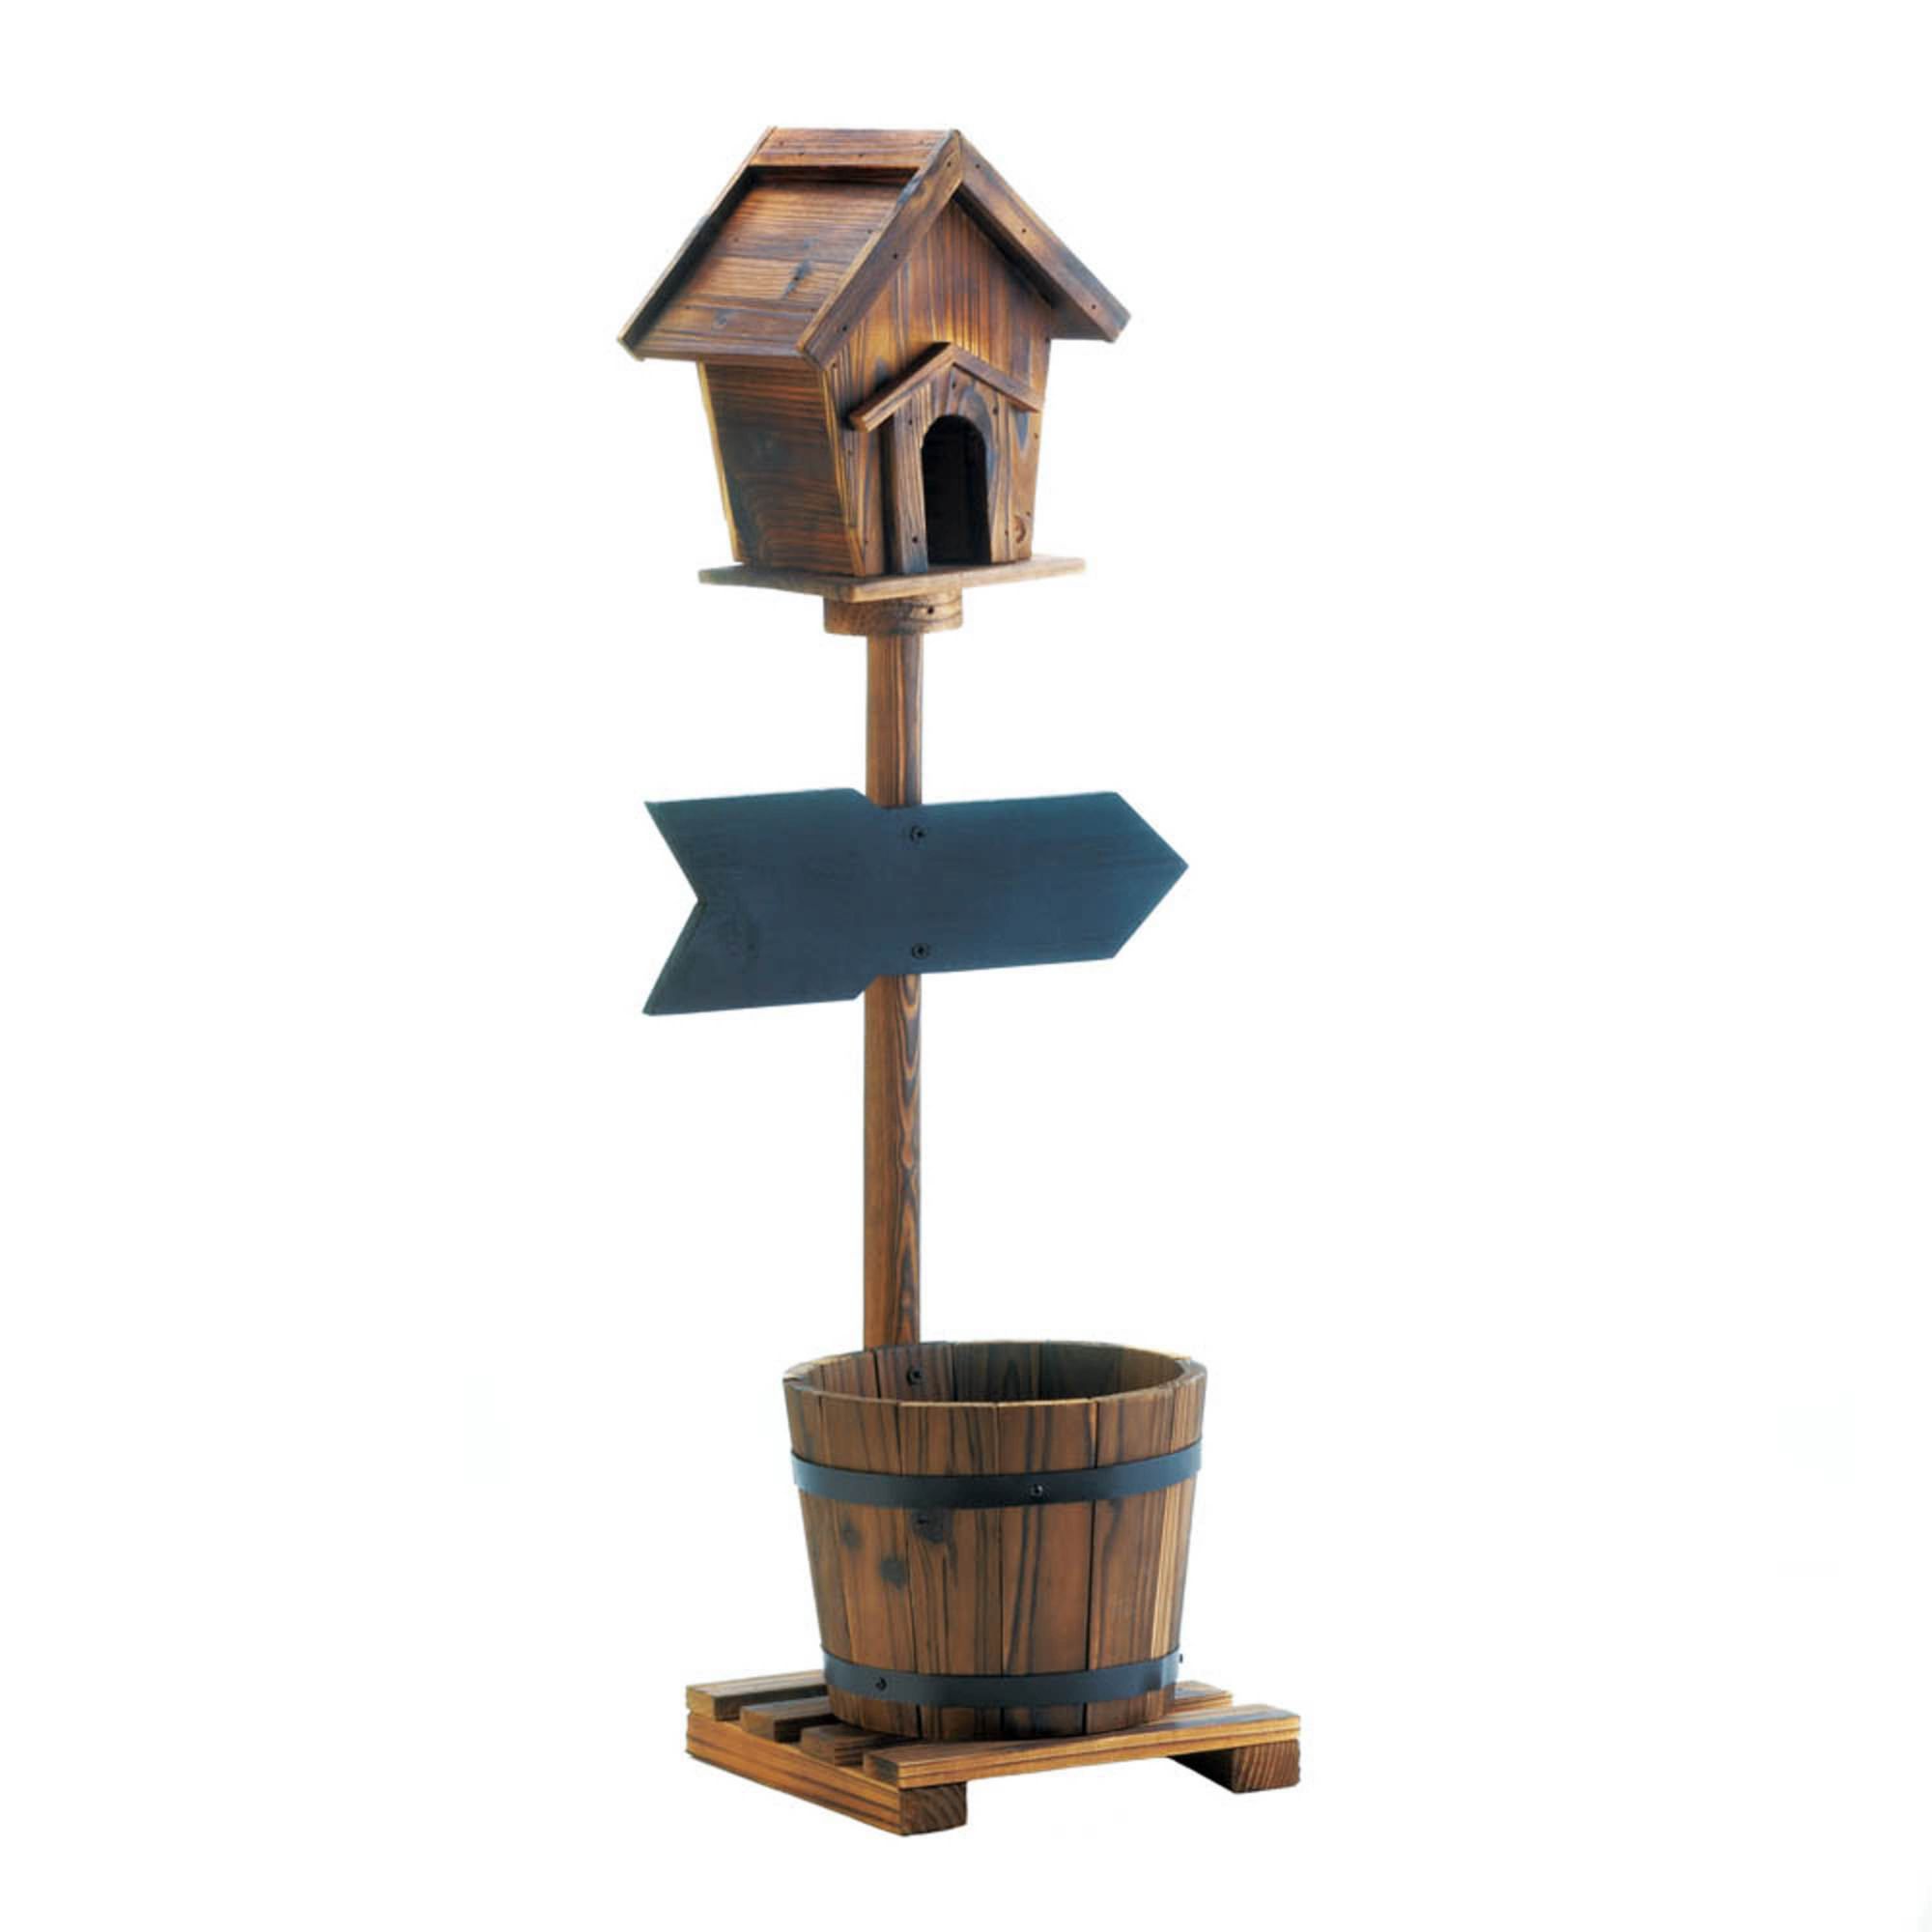 Zingz & Thingz Wooden Welcome Birdhouse Rustic Barrel Planter in Brown - image 4 of 4